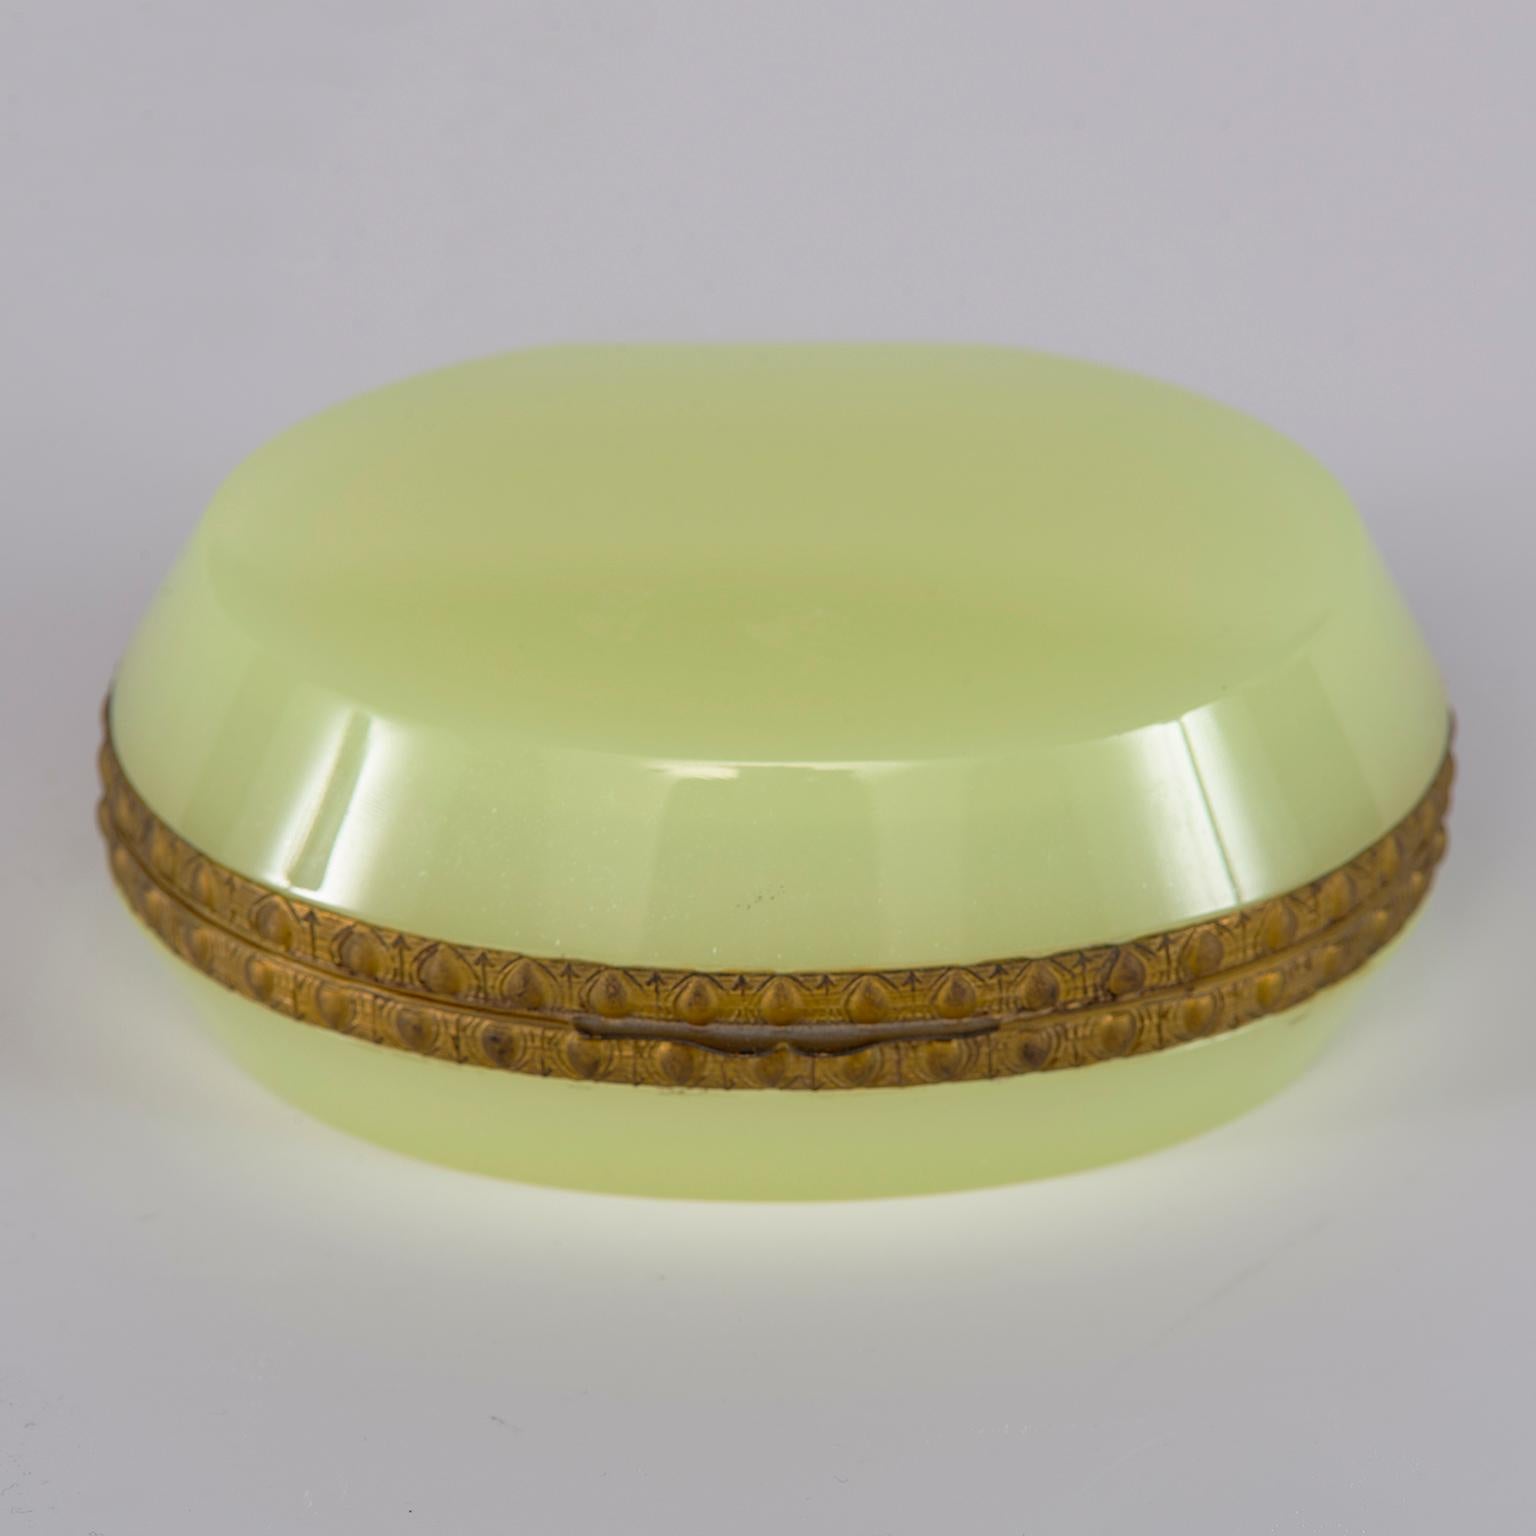 French uranium opaline glass hinged box is oval shaped with fancy brass trim. Unknown maker, circa 1920s.